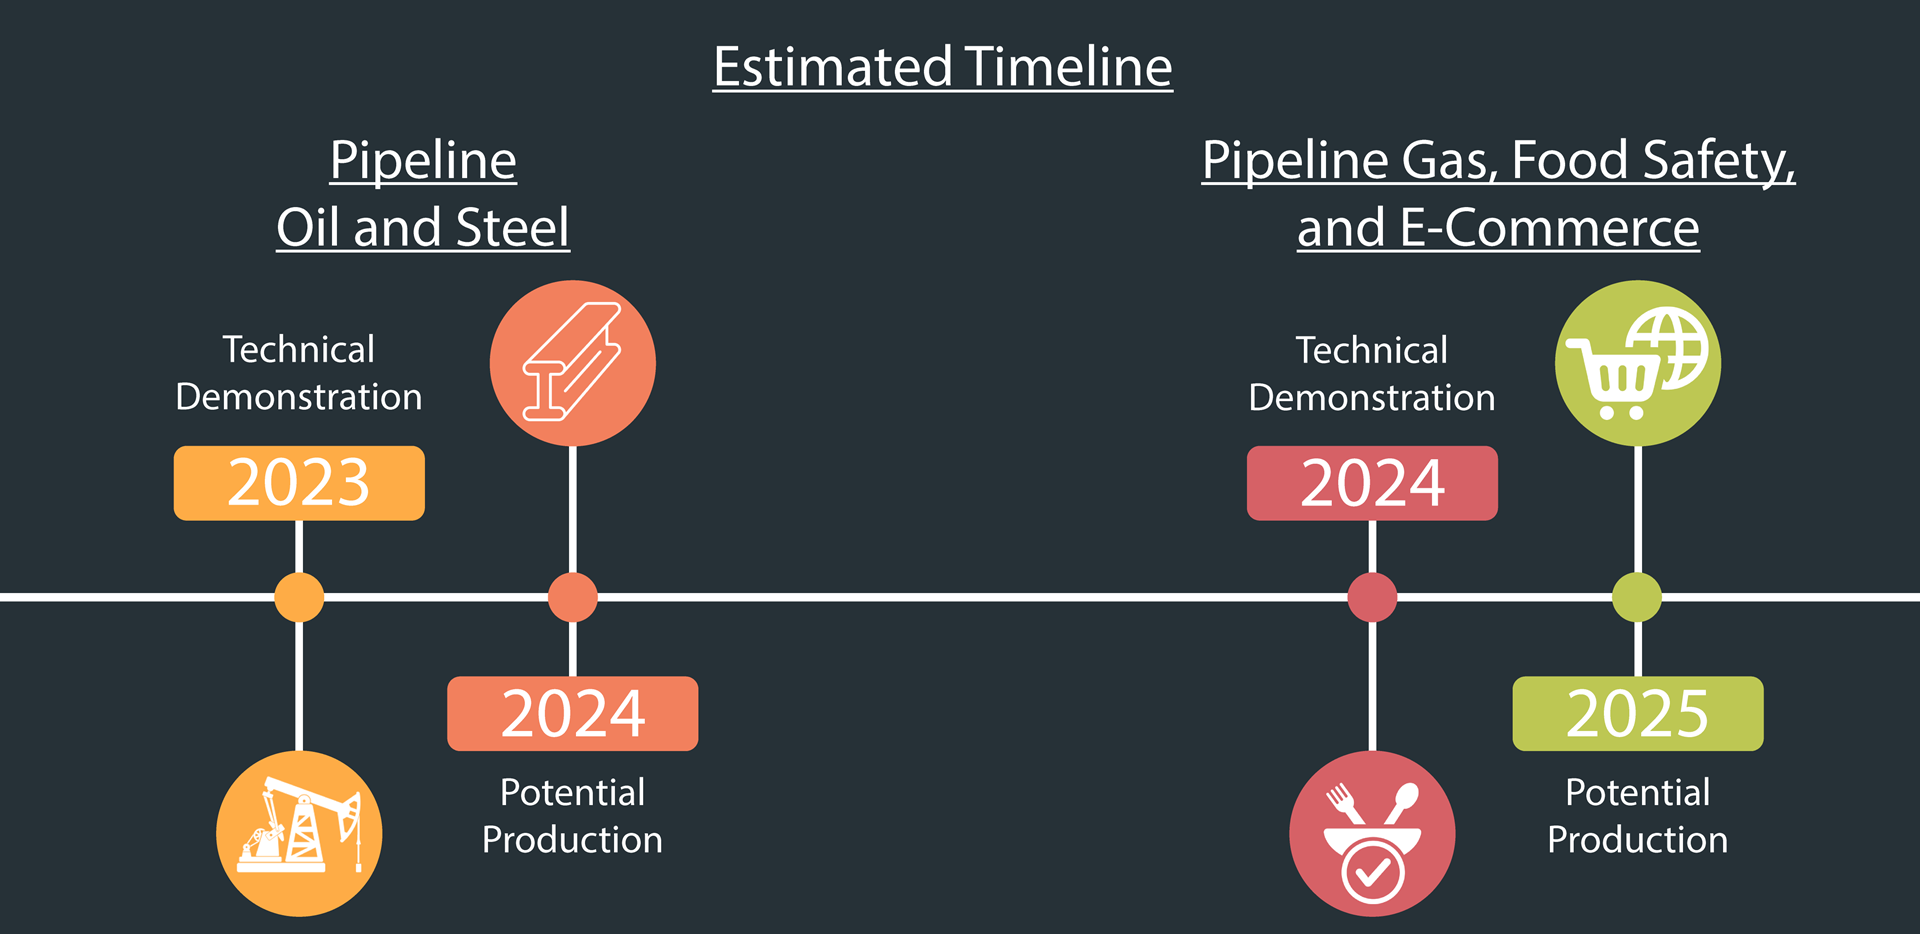 Estimated timeline of Pipeline Oil and Steel